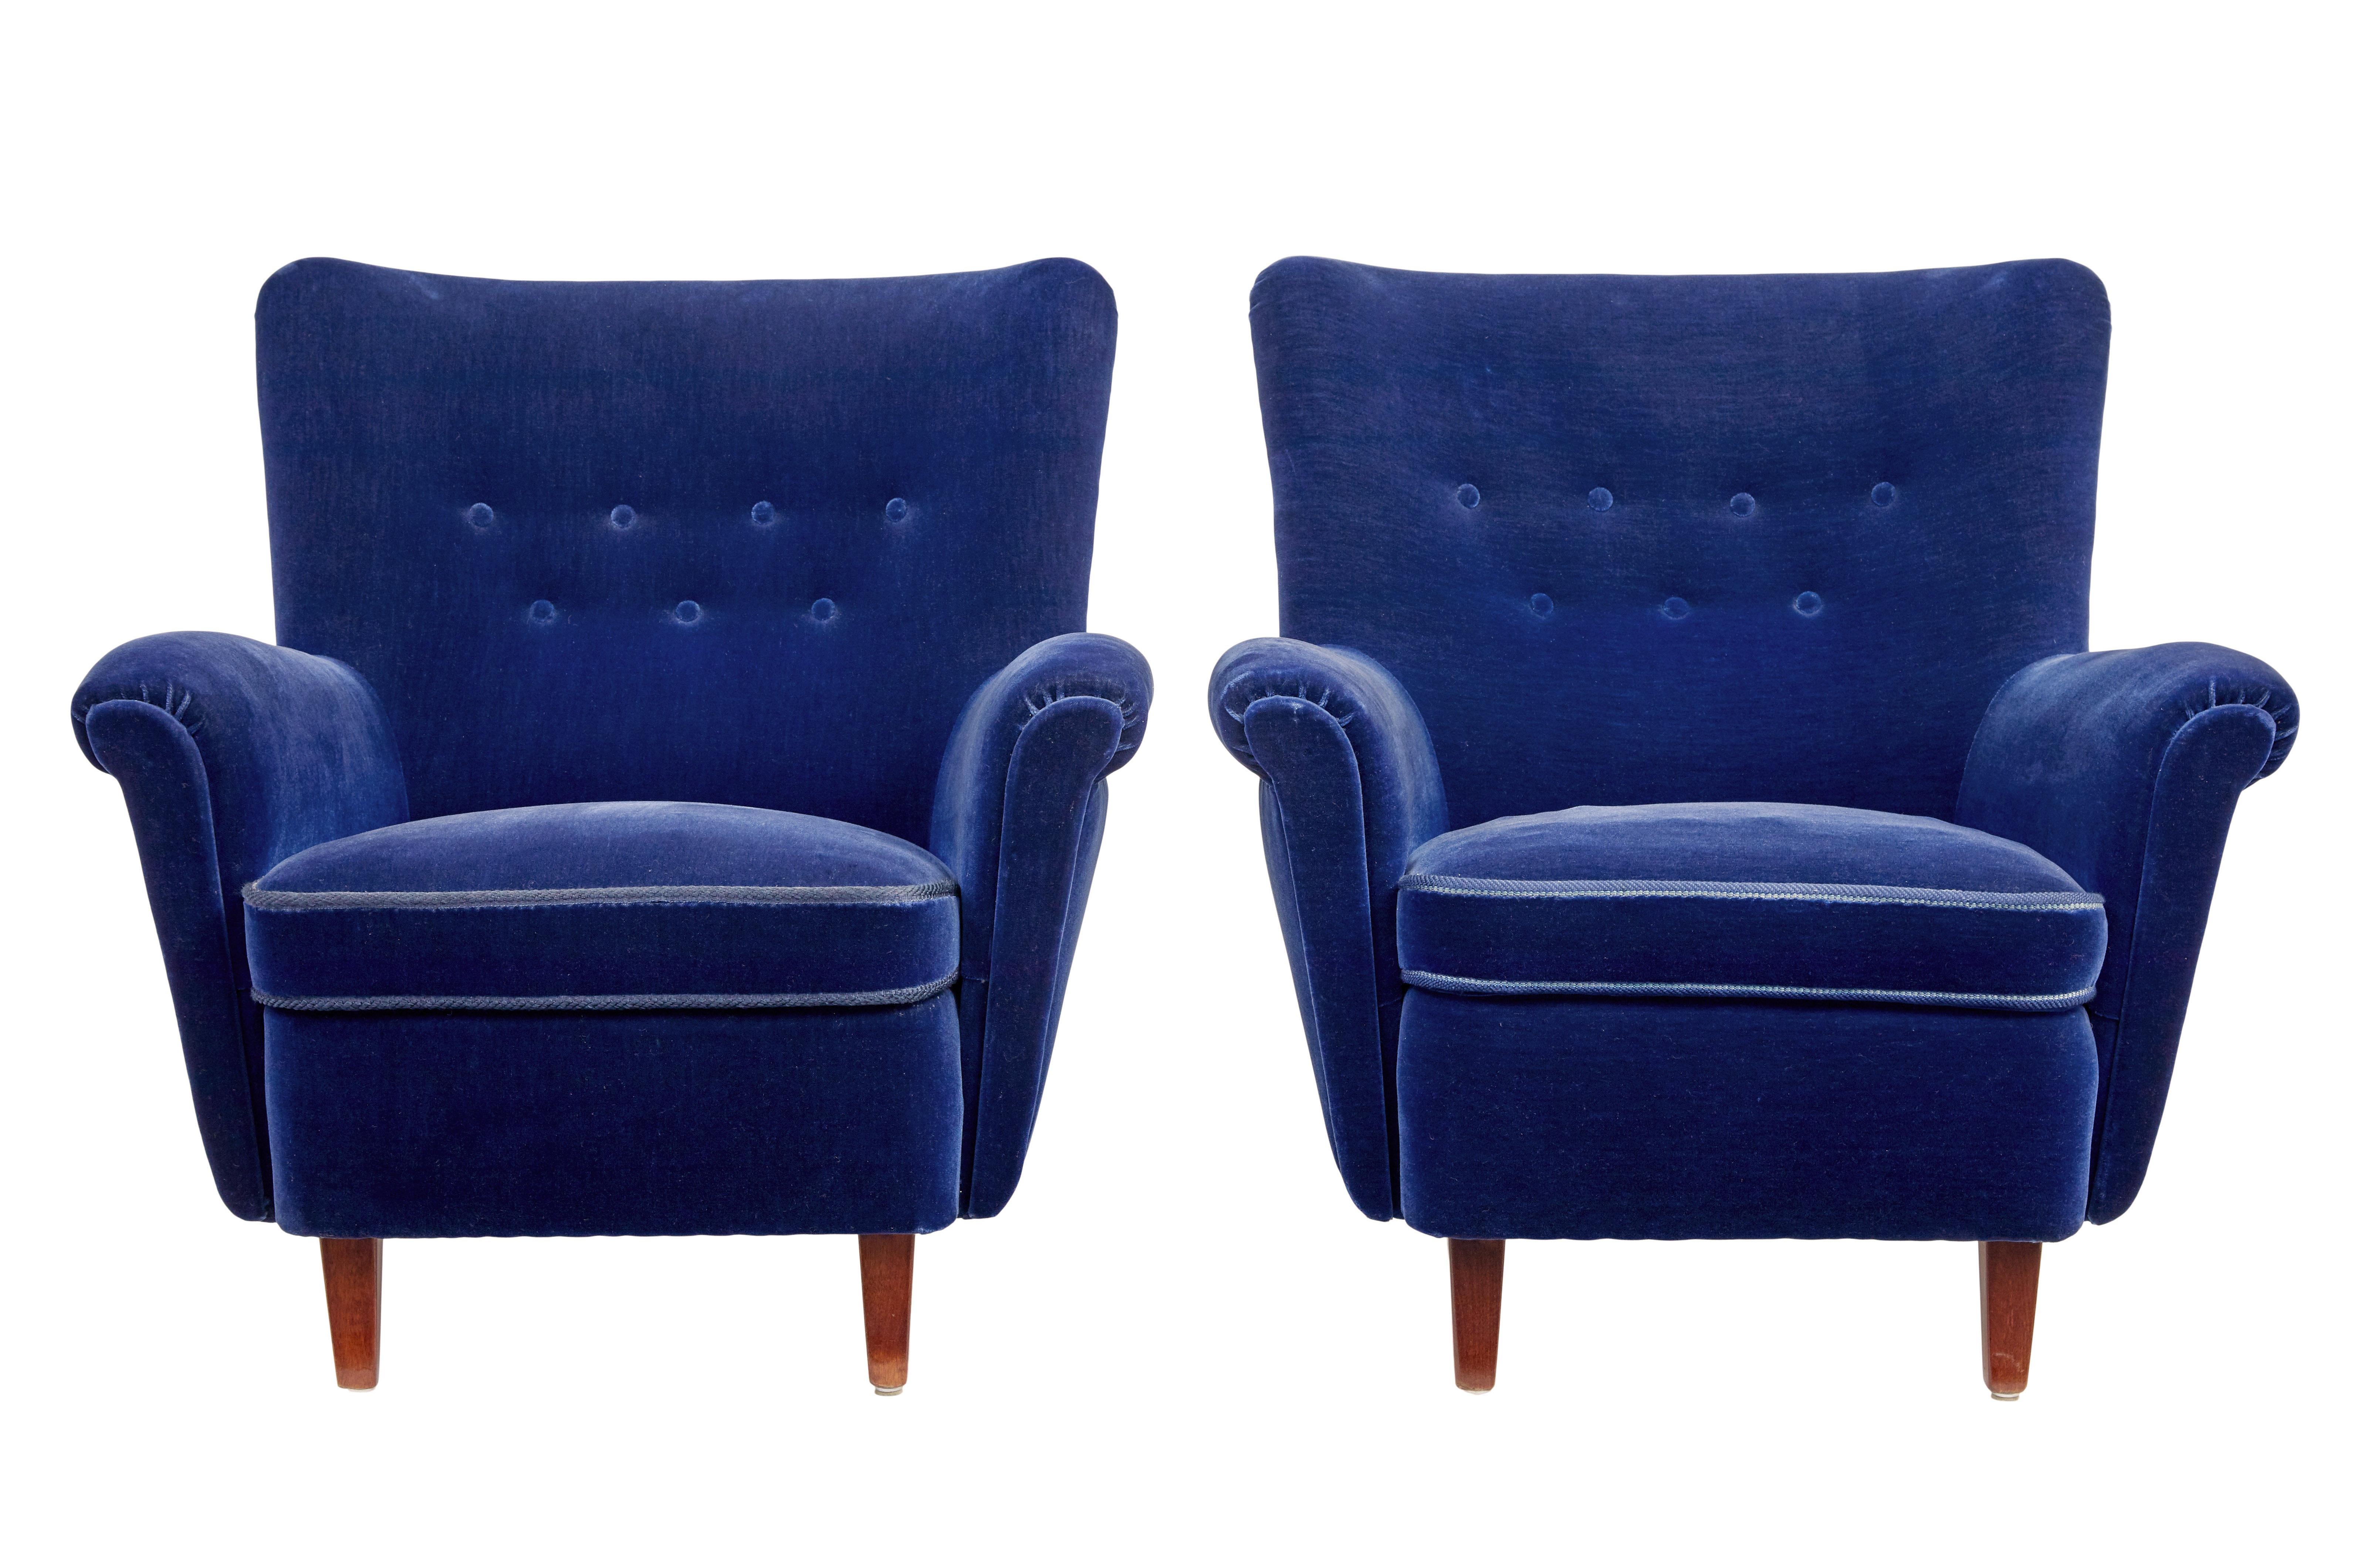 We are pleased to present this stunning 3 piece suite circa 1950.

Suite comprises of a pair of armchairs and matching sofa.  Richly upholstered in a deep blue velour fabric.

2 seater sofa button backed and shaped, roll over arms and matching braid